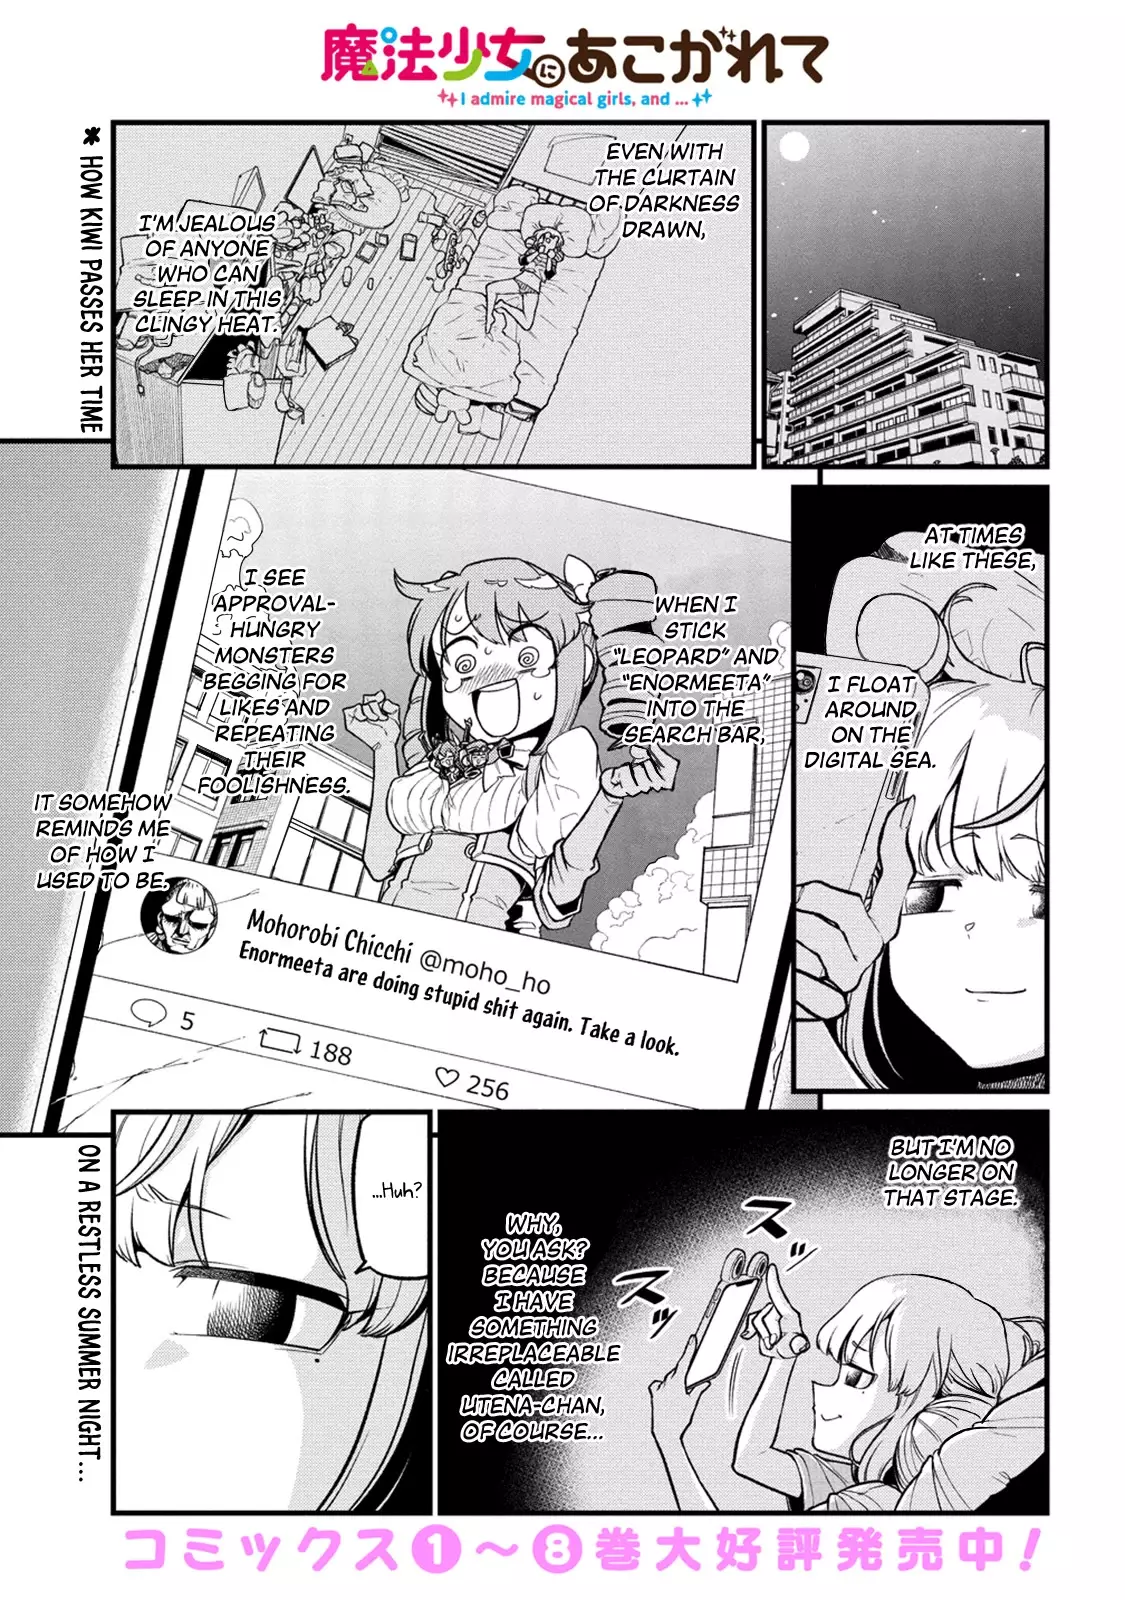 Looking Up To Magical Girls - 43 page 1-4943f35f